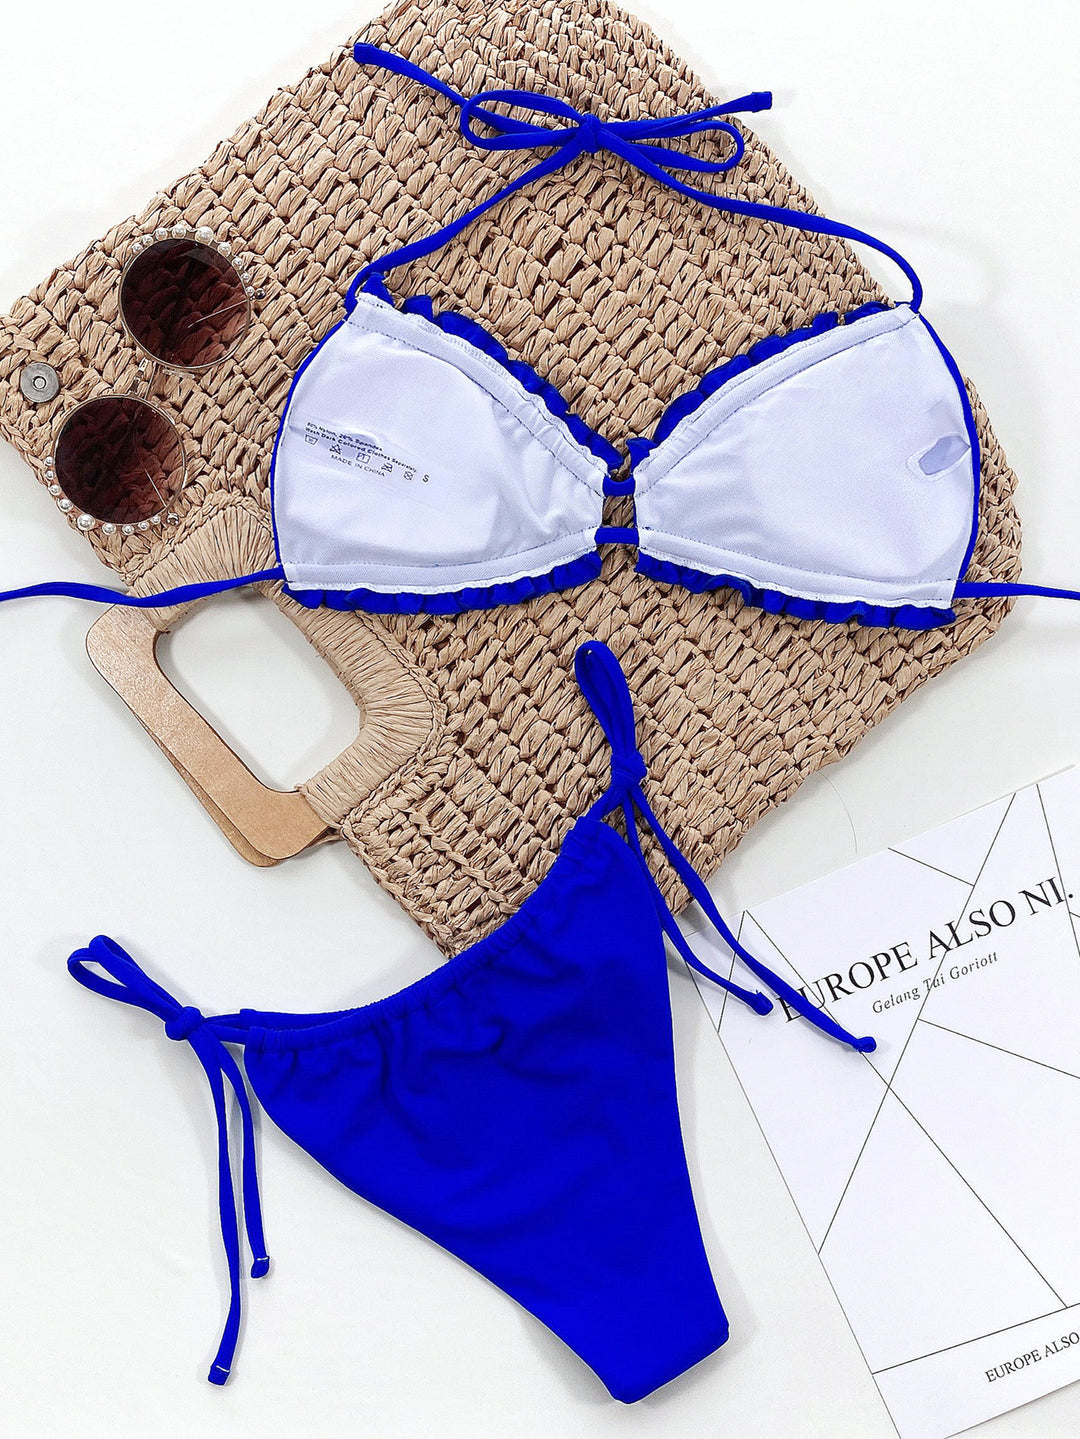 a blue and white bikini top and a pair of sunglasses